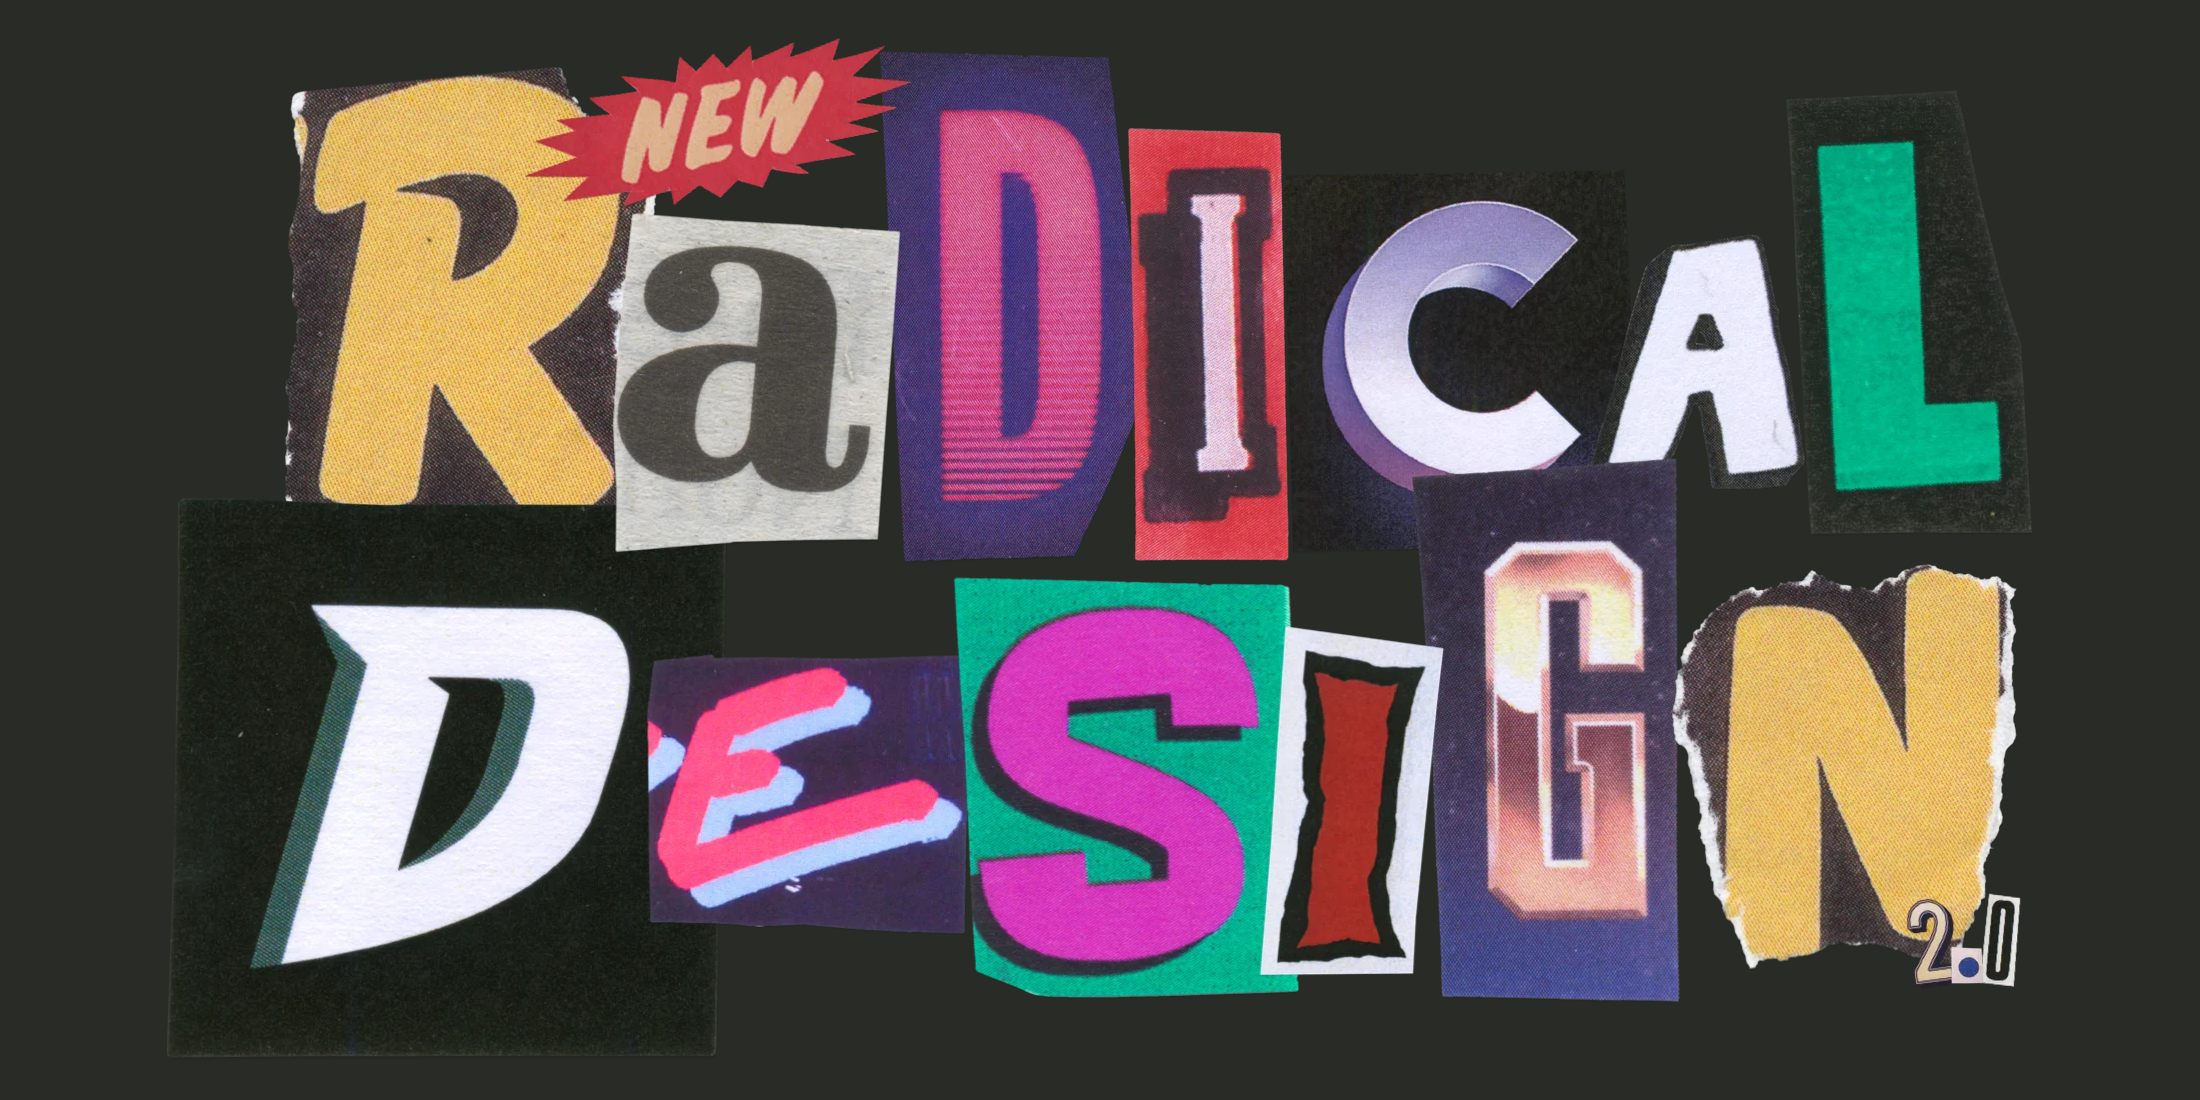 Radical Design - A new course by Jack McDade